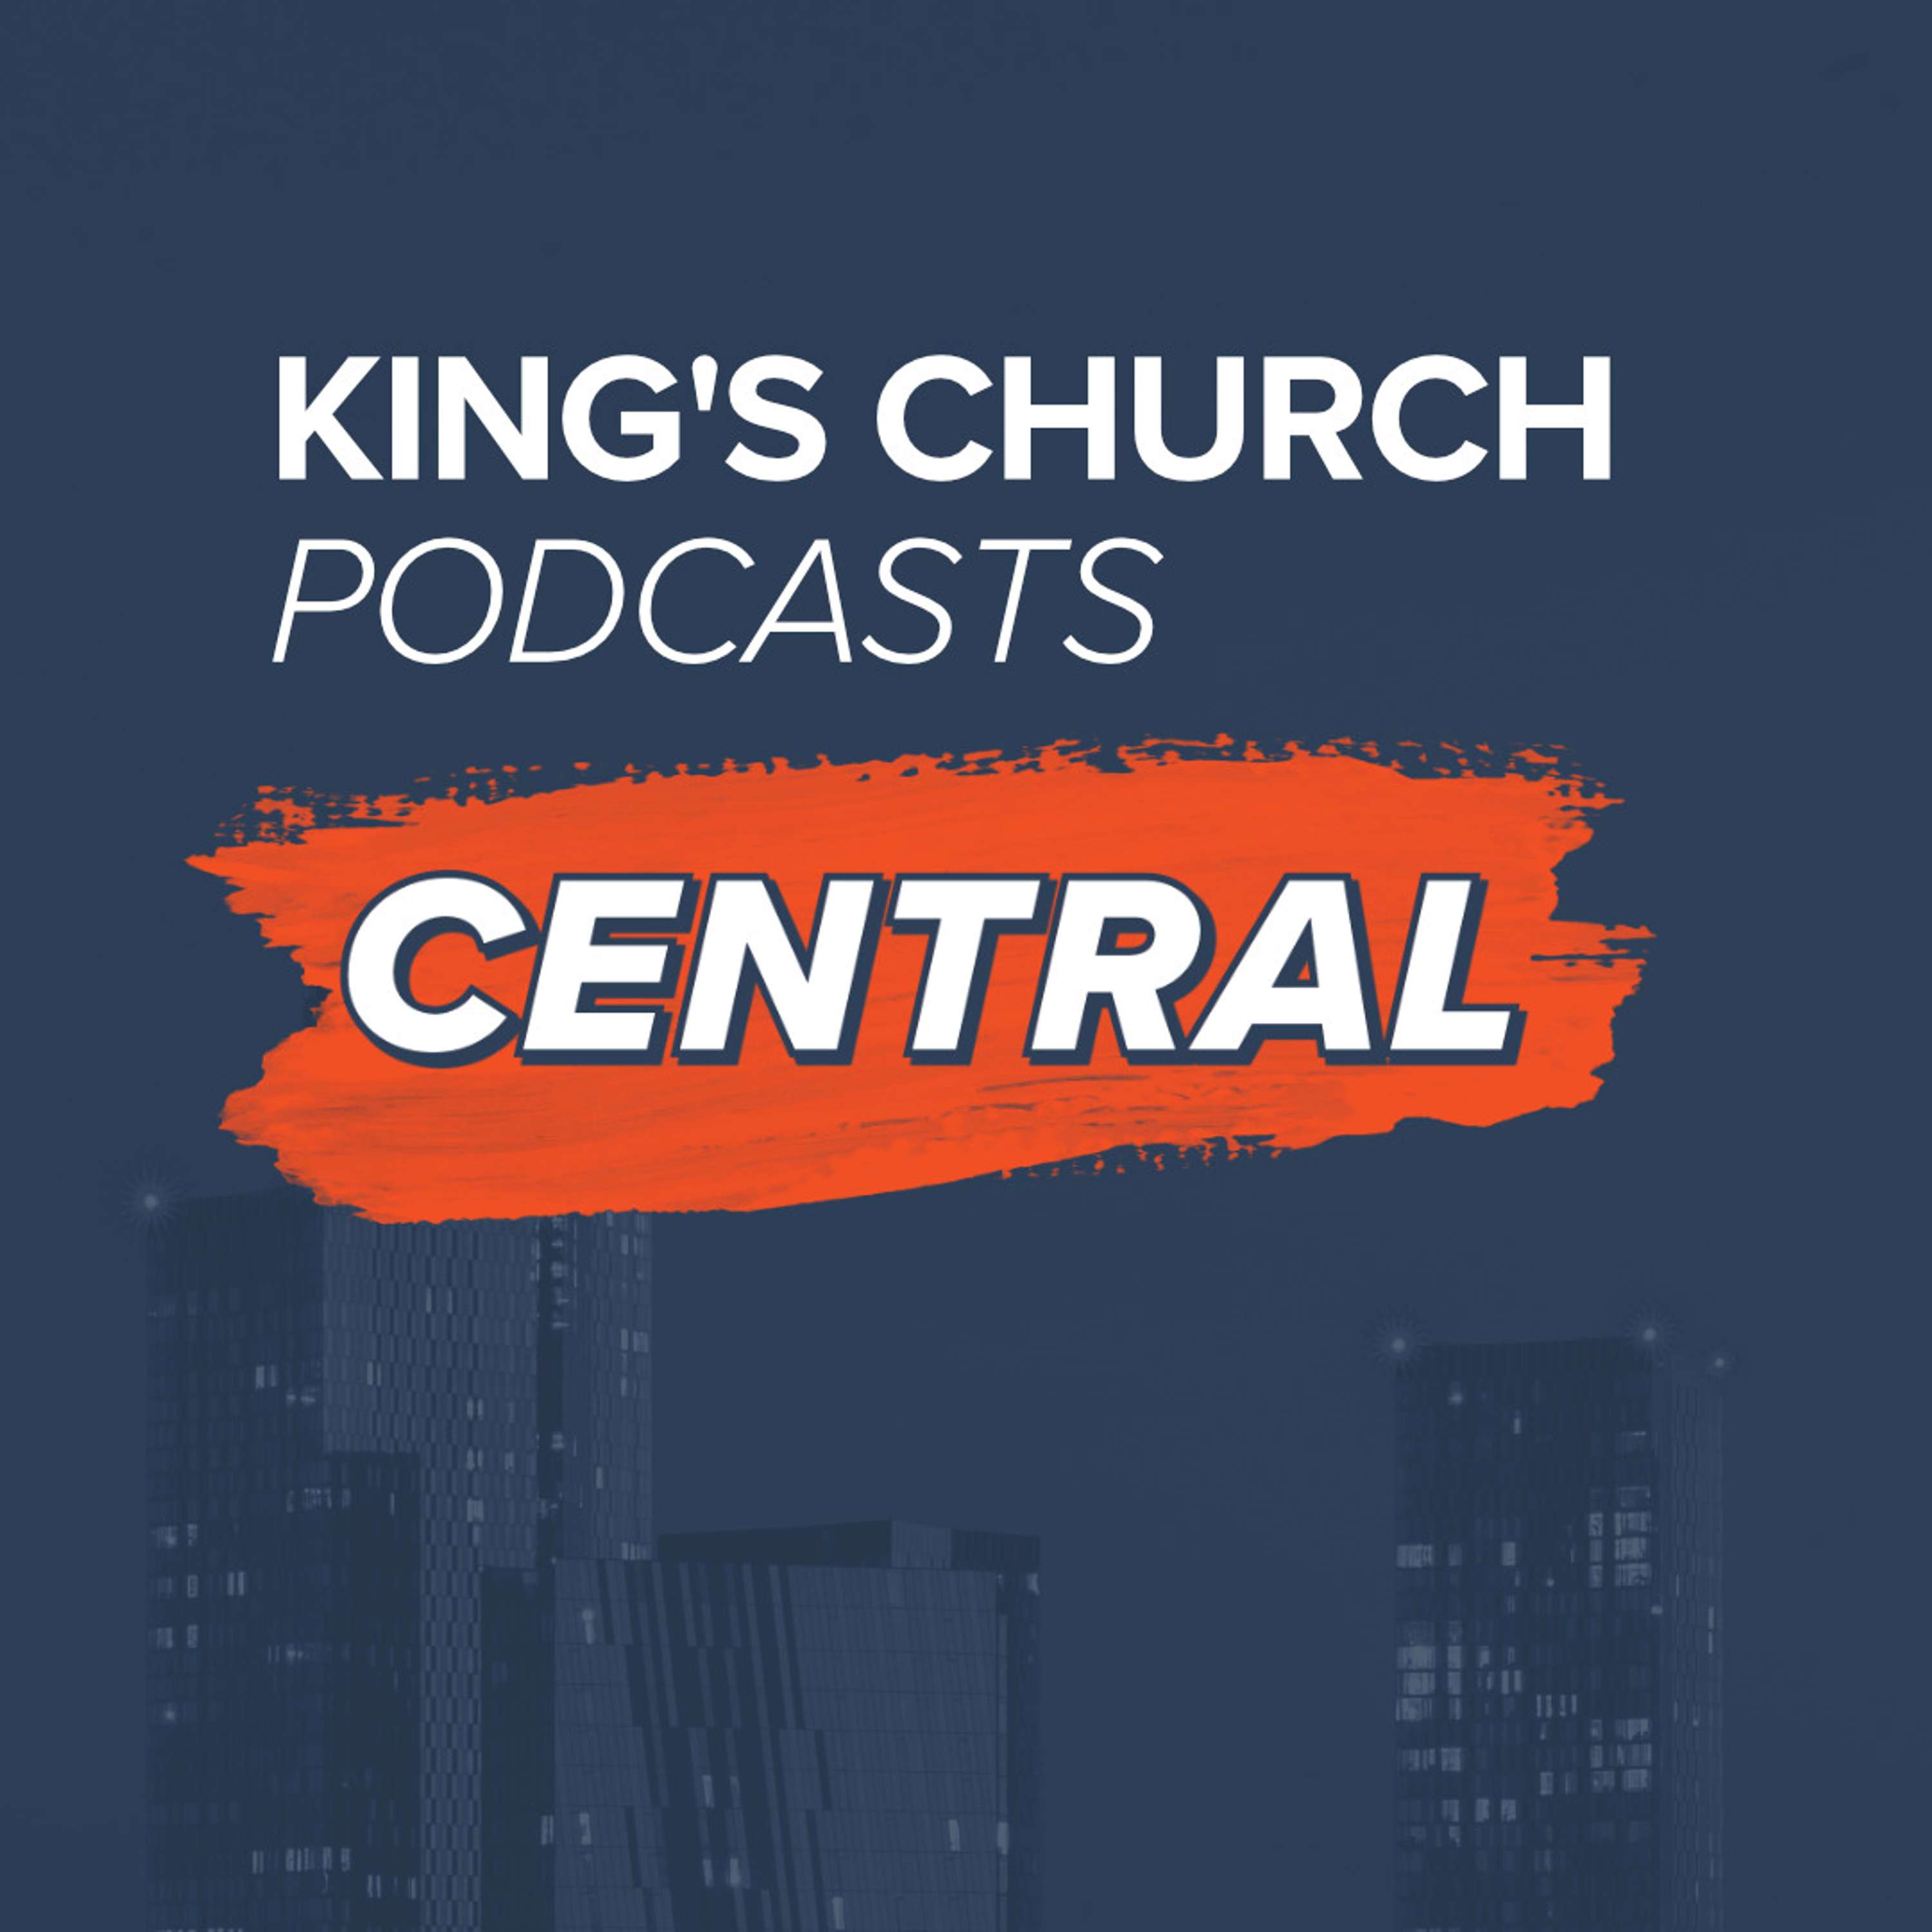 King's Church Podcast - Central